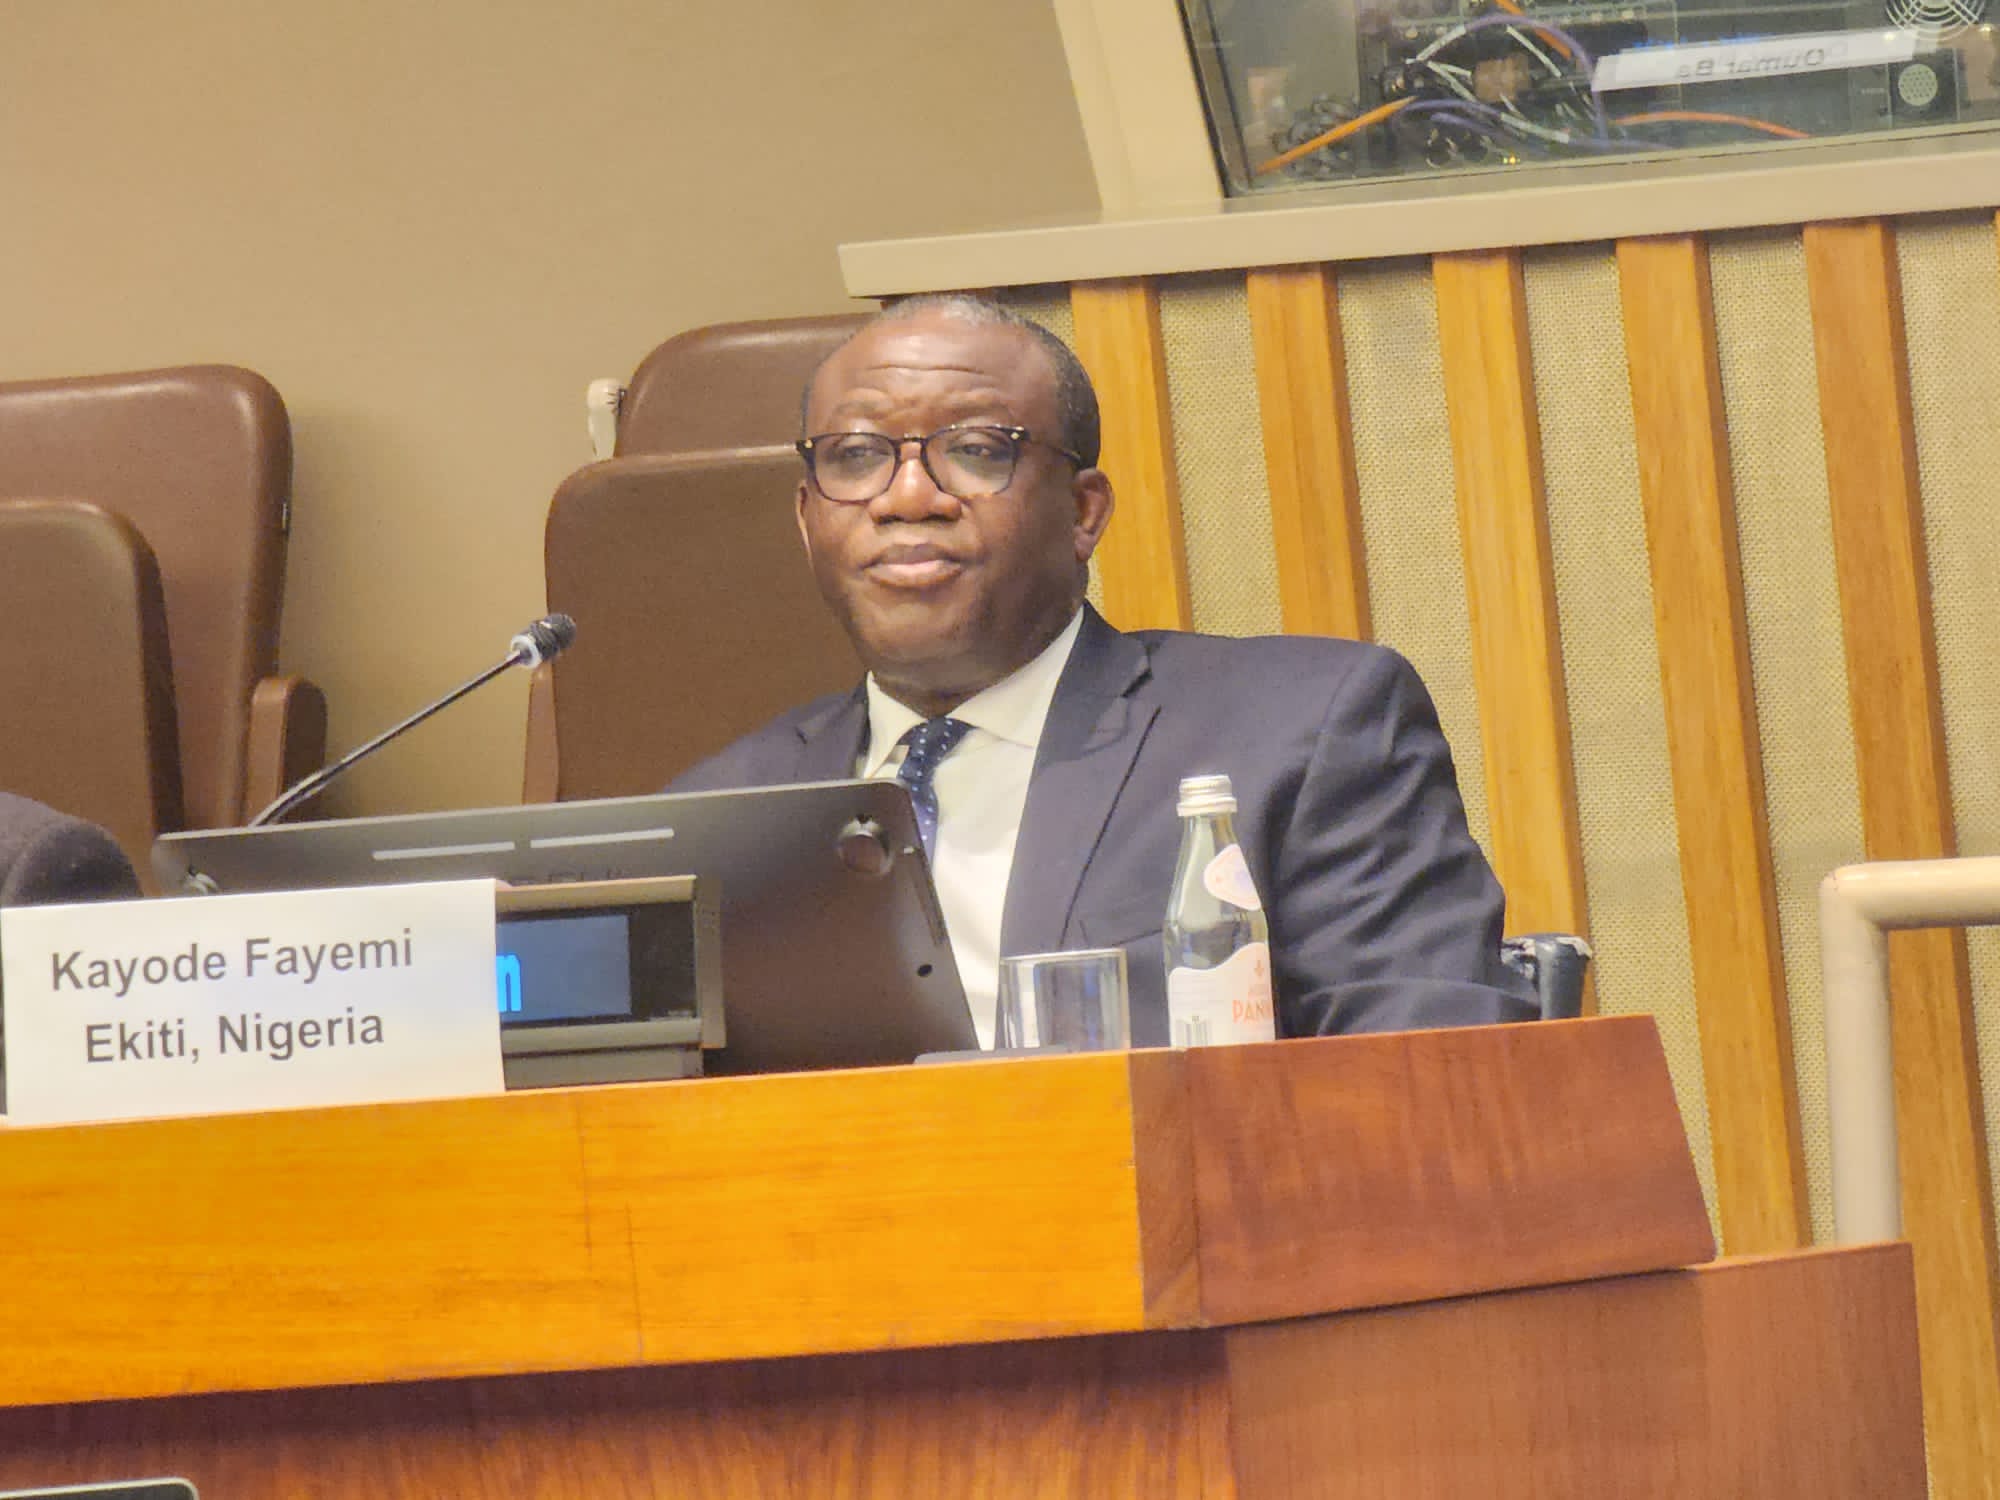 UN Conference: Fayemi advocates water security in Africa (Photos)